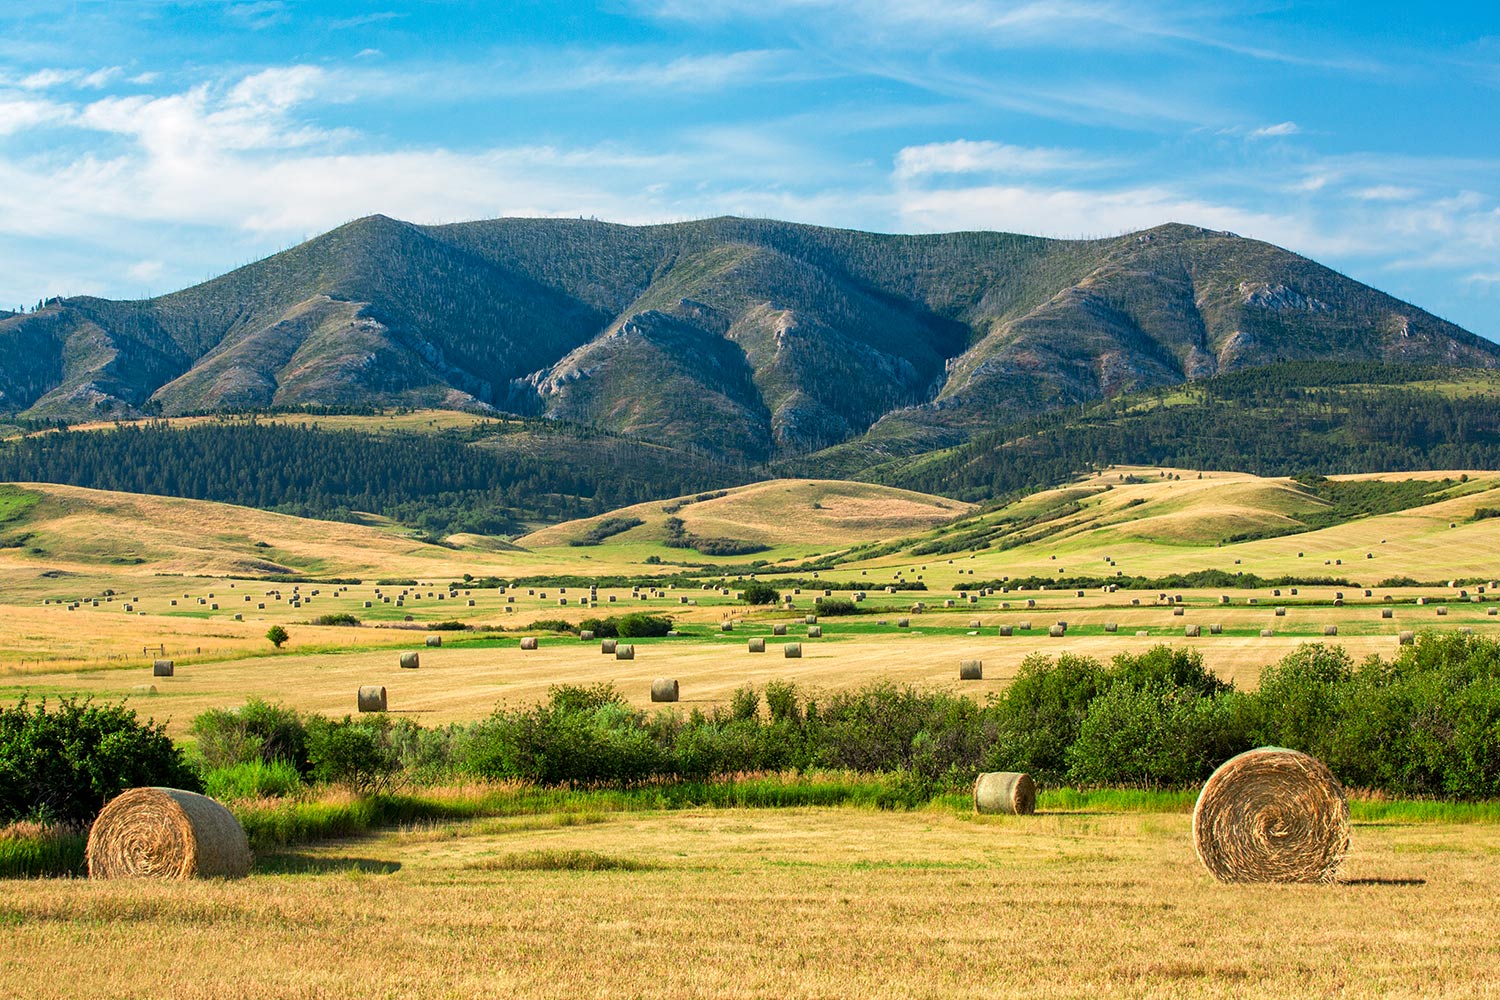 The Judith Mountains draped with a field of round bales of hay near Lewistown, Montana.&nbsp;→ Buy a Print&nbsp;or&nbsp;License Photo